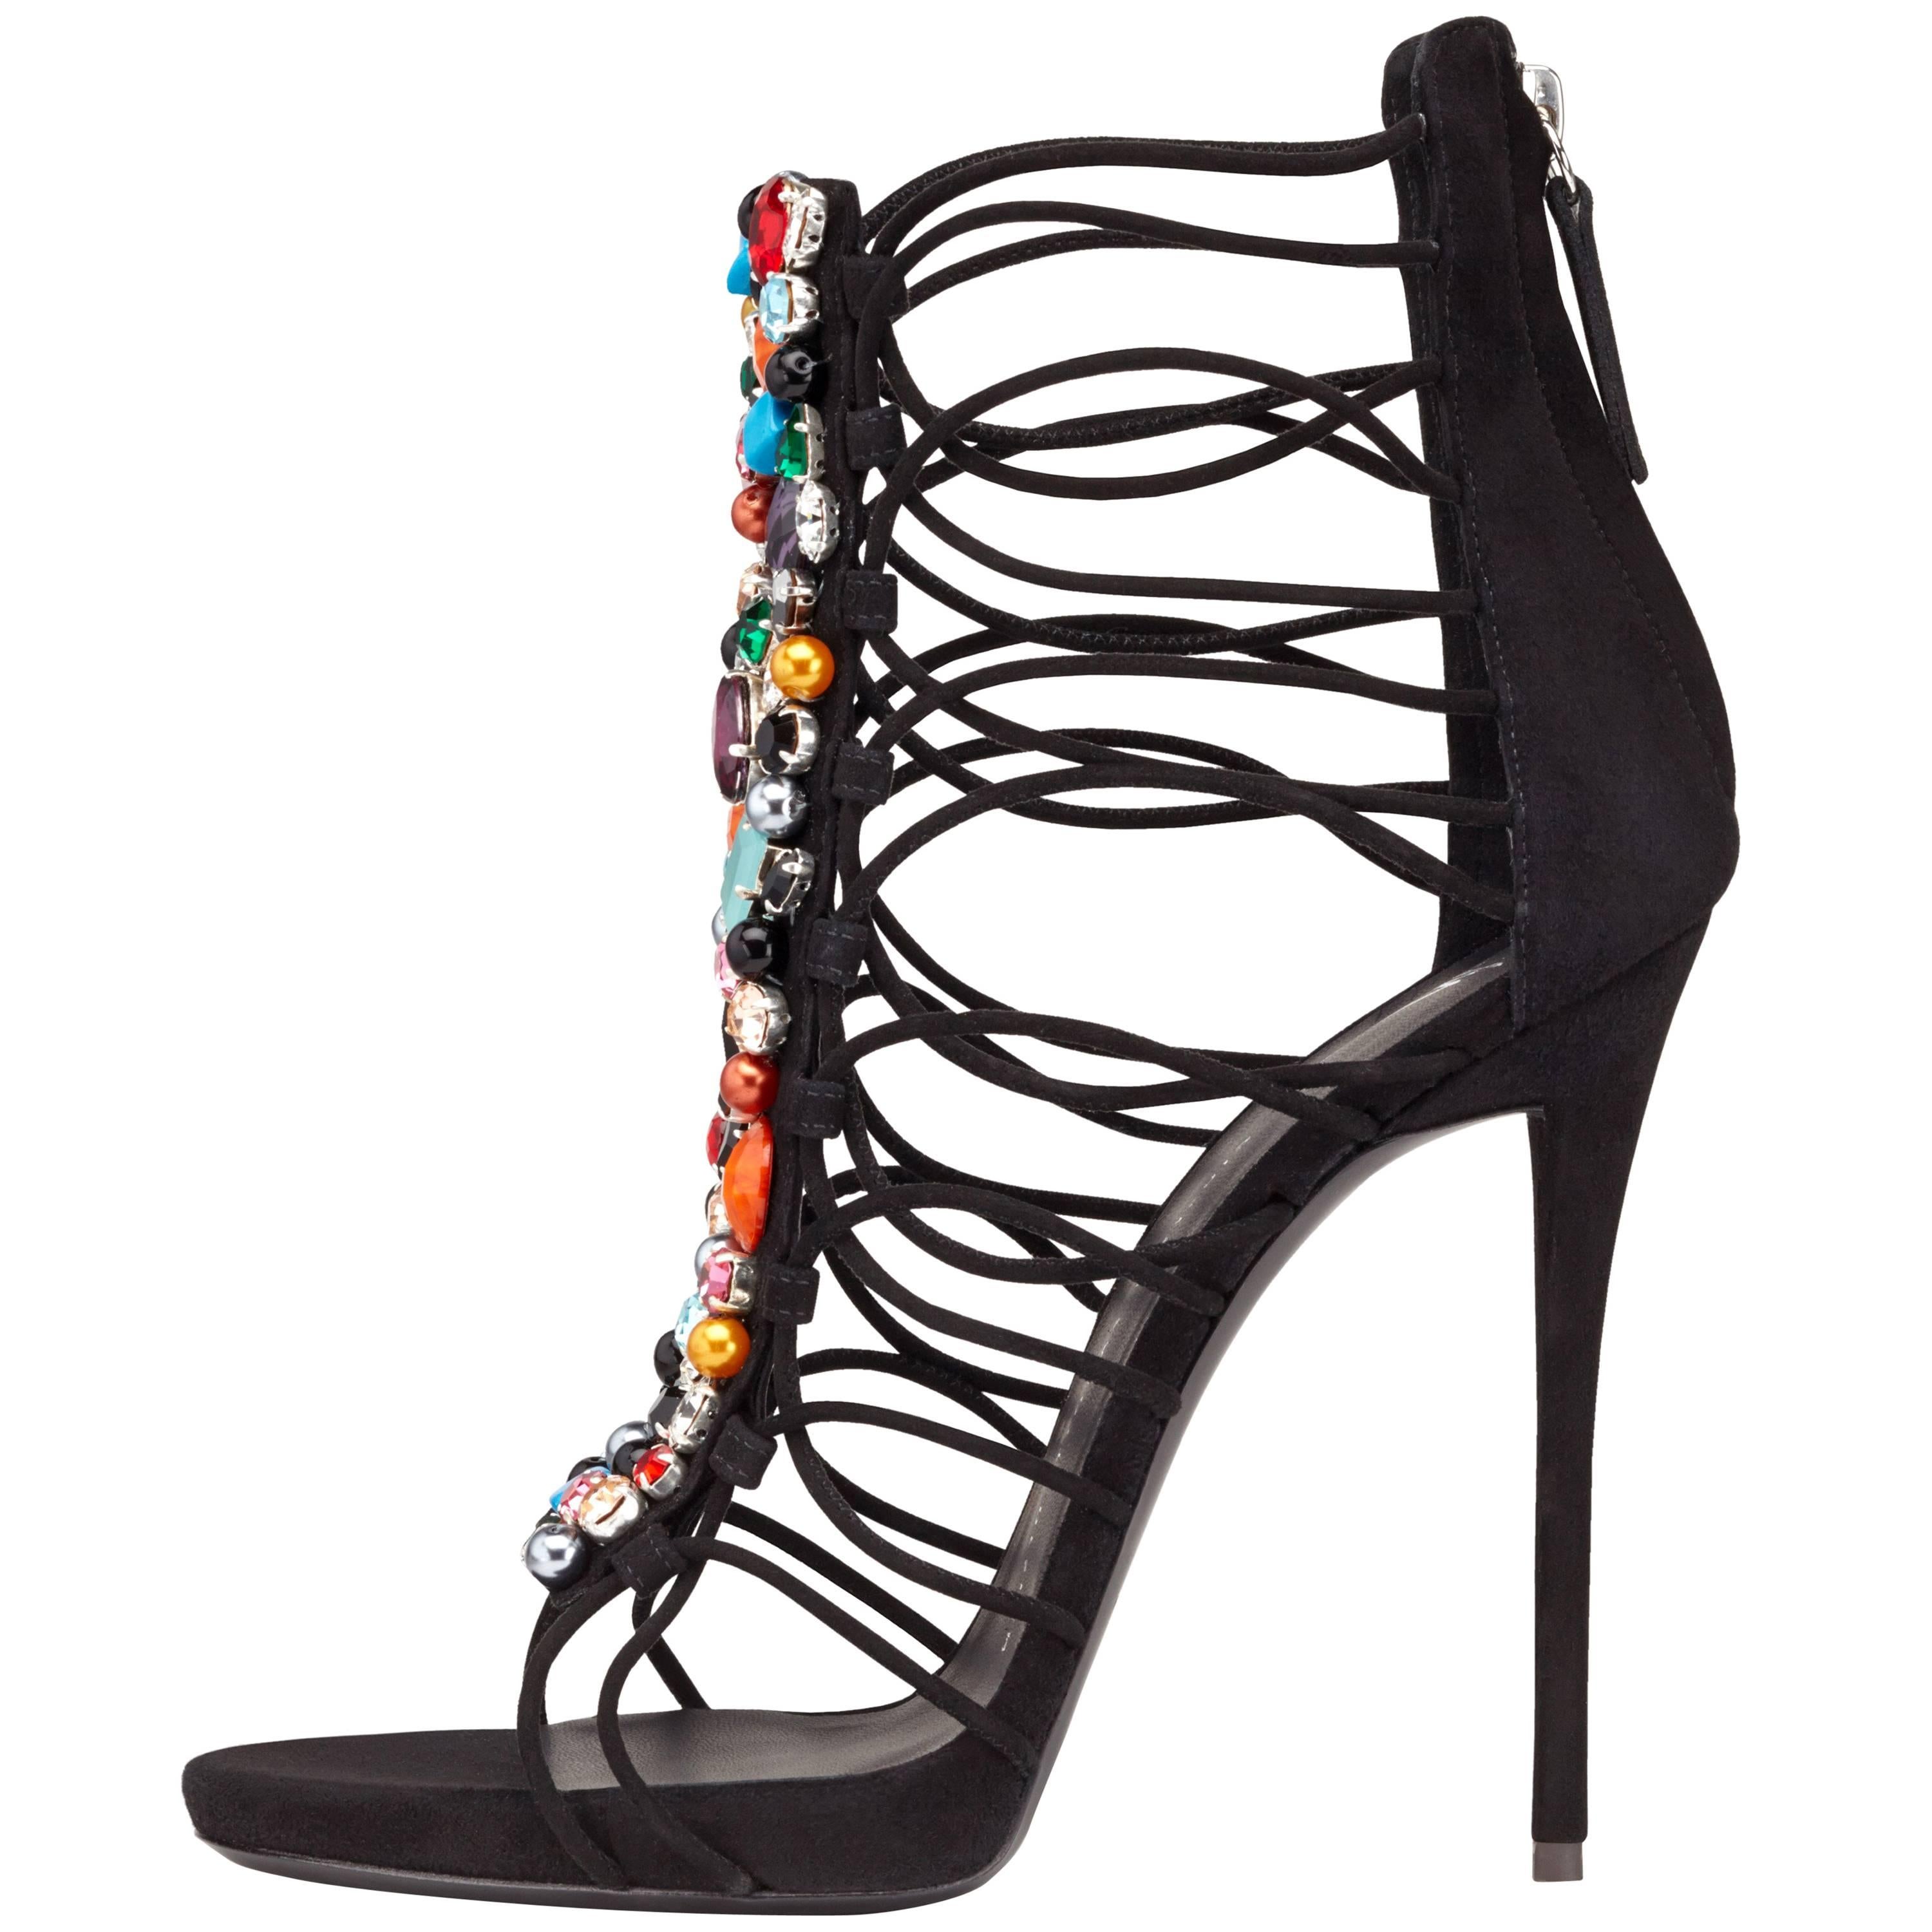 Giuseppe Zanotti New Sold Out Black Suede Crystal Evening Gladiator Heels in Box